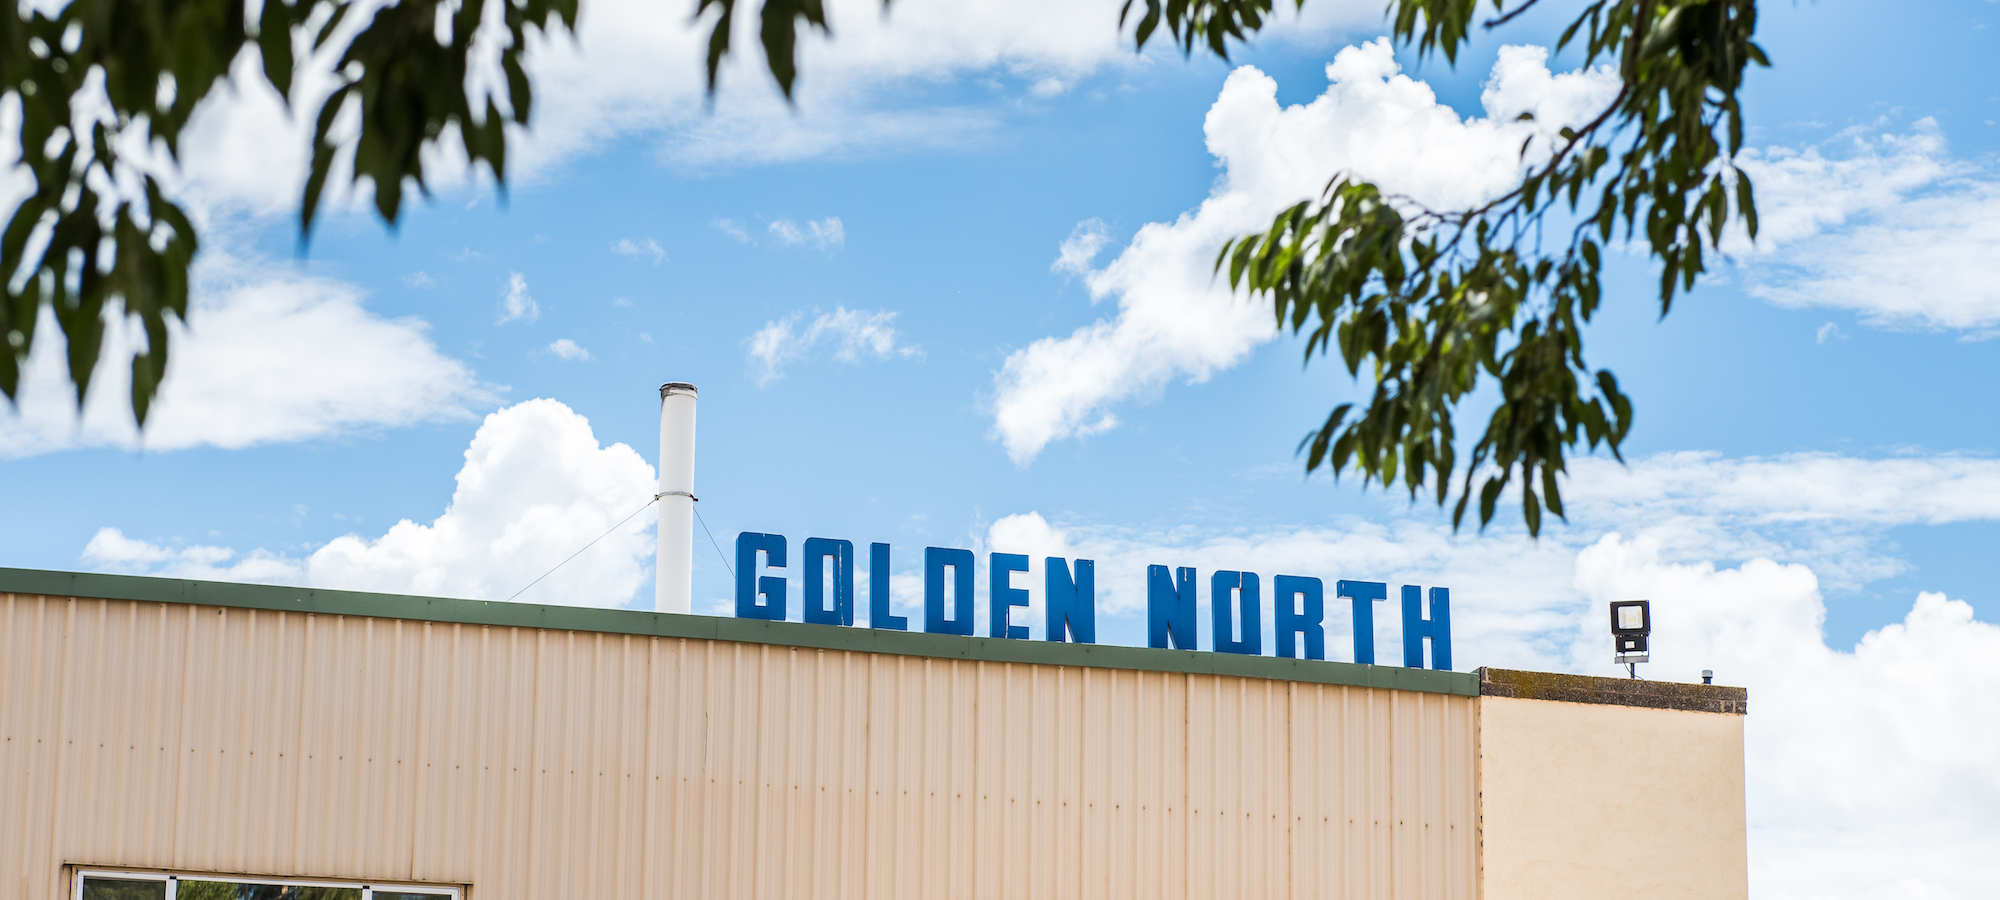 Northern exposure leads to increasing exports for Golden North ice cream